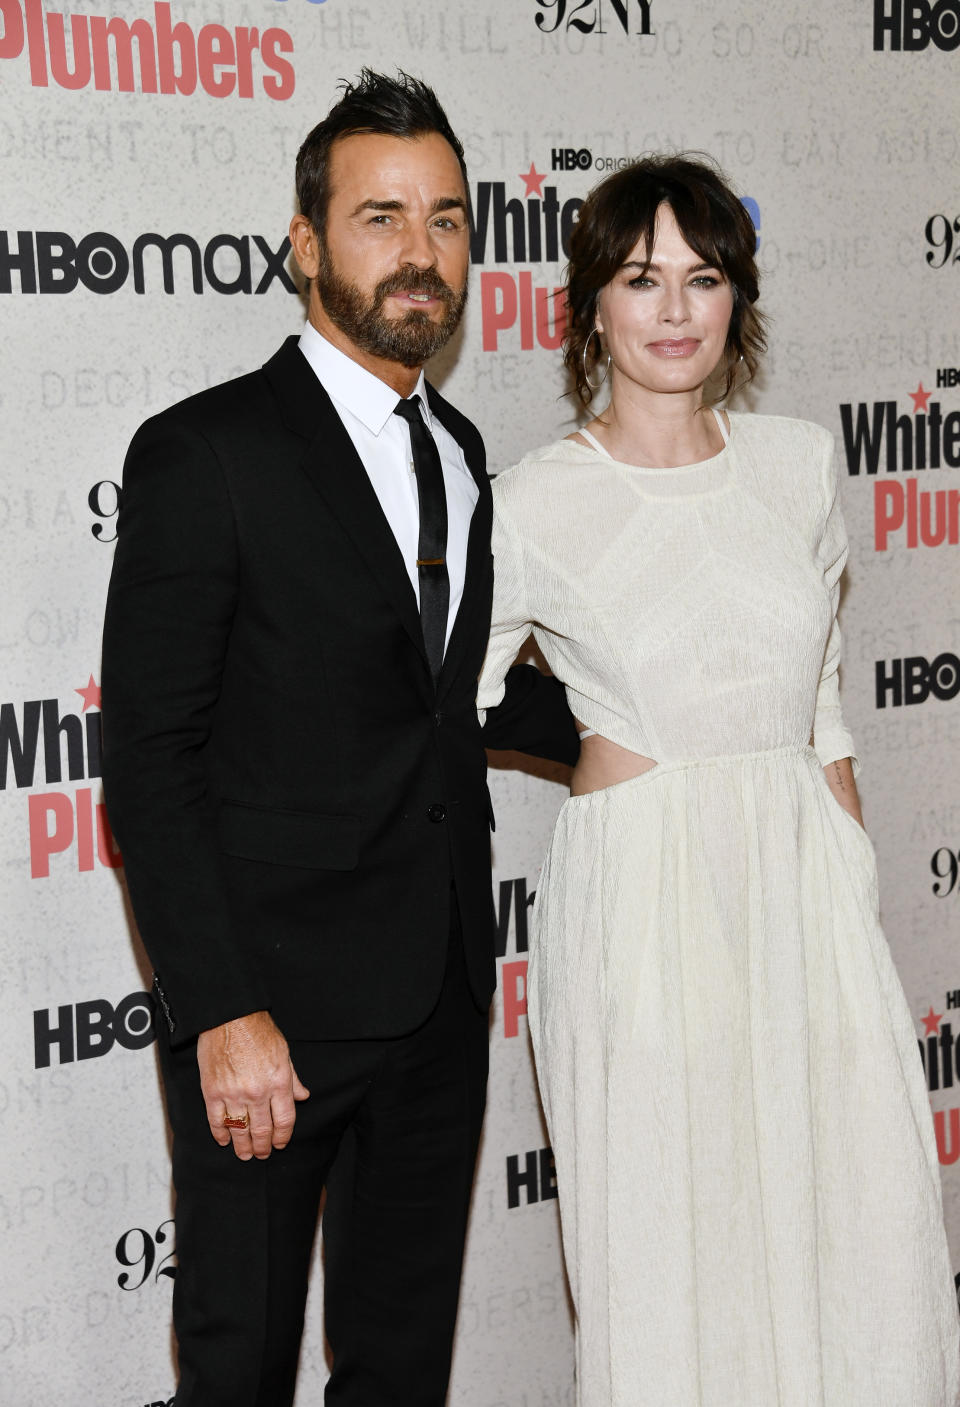 Justin Theroux, left, and Lena Headey attend the premiere of HBO's "White House Plumbers," at the 92nd Street Y, Monday, April 17, 2023, in New York. (Photo by Evan Agostini/Invision/AP)